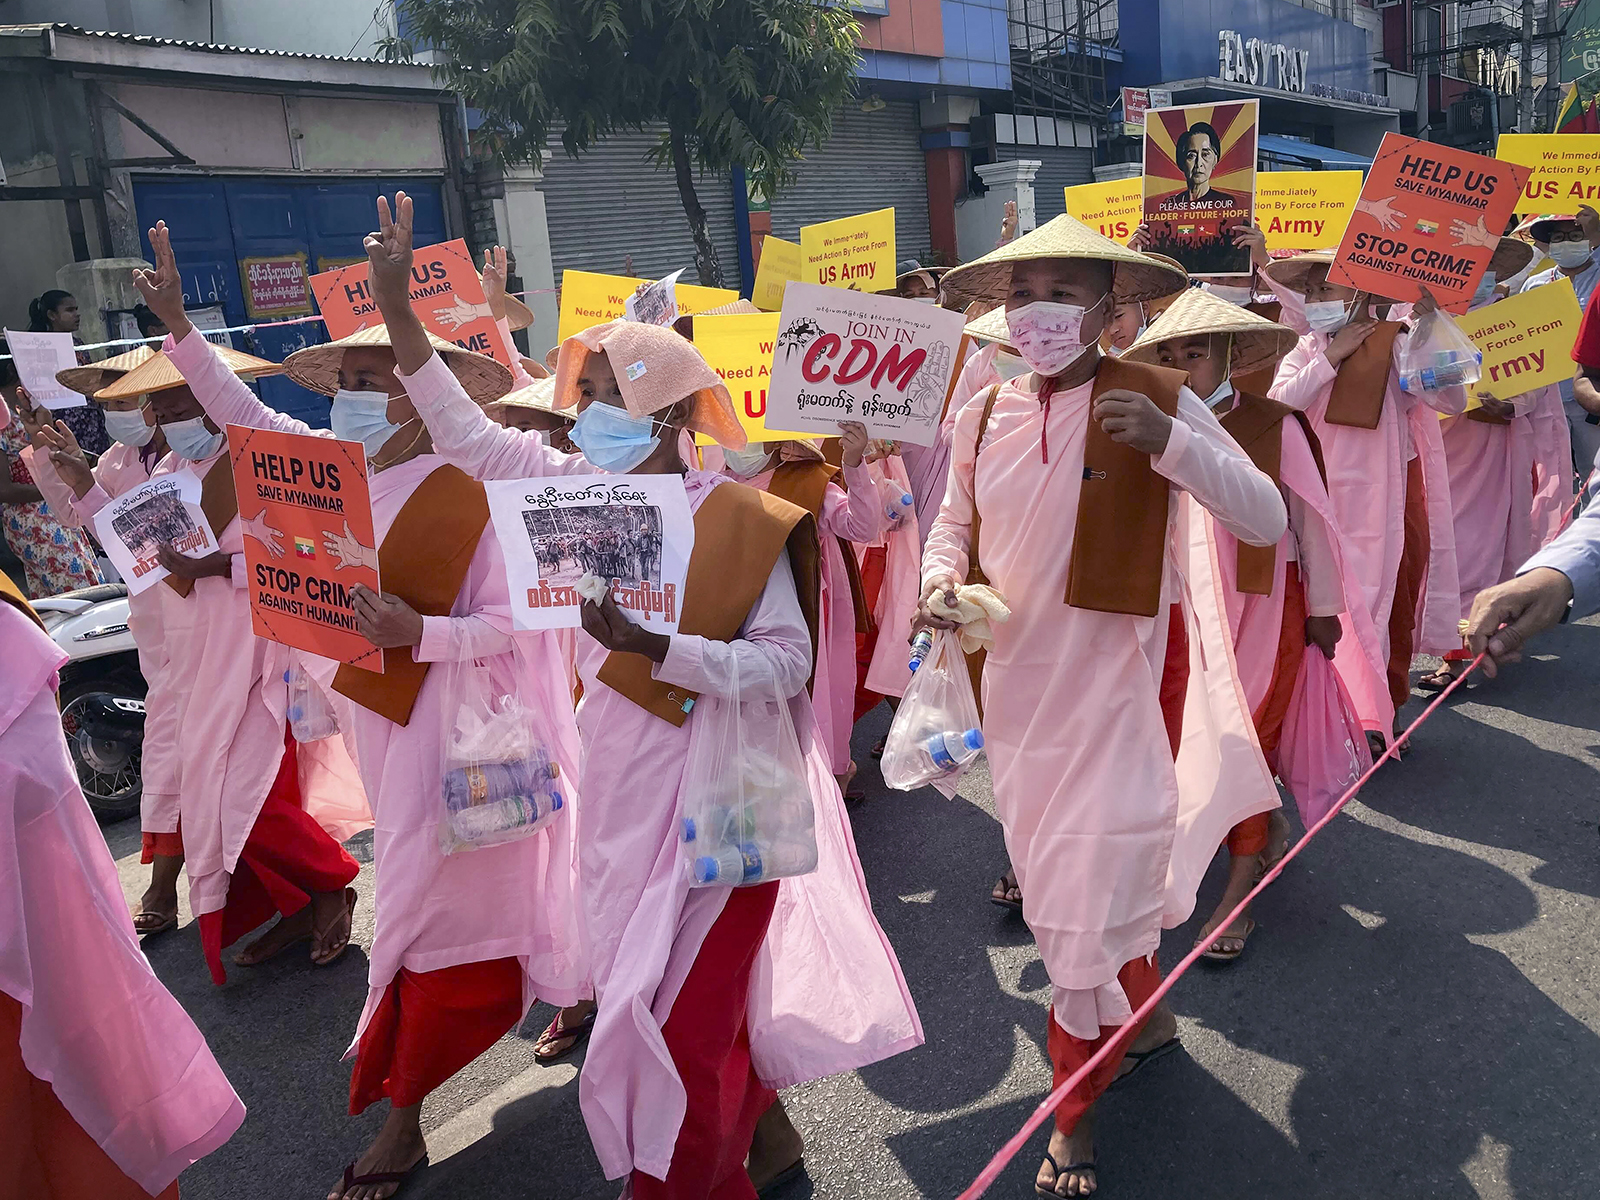 Buddhist nuns display signs, including images of deposed Myanmar leader Aung San Suu Kyi, during a street march in Mandalay, Myanmar, Friday, Feb. 26, 2021. Tensions escalated Thursday on the streets of Yangon, Myanmar's biggest city, as supporters of Myanmar's junta attacked people protesting the military government that took power in a coup, using slingshots, iron rods and knives to injure several of the demonstrators. (AP Photo)